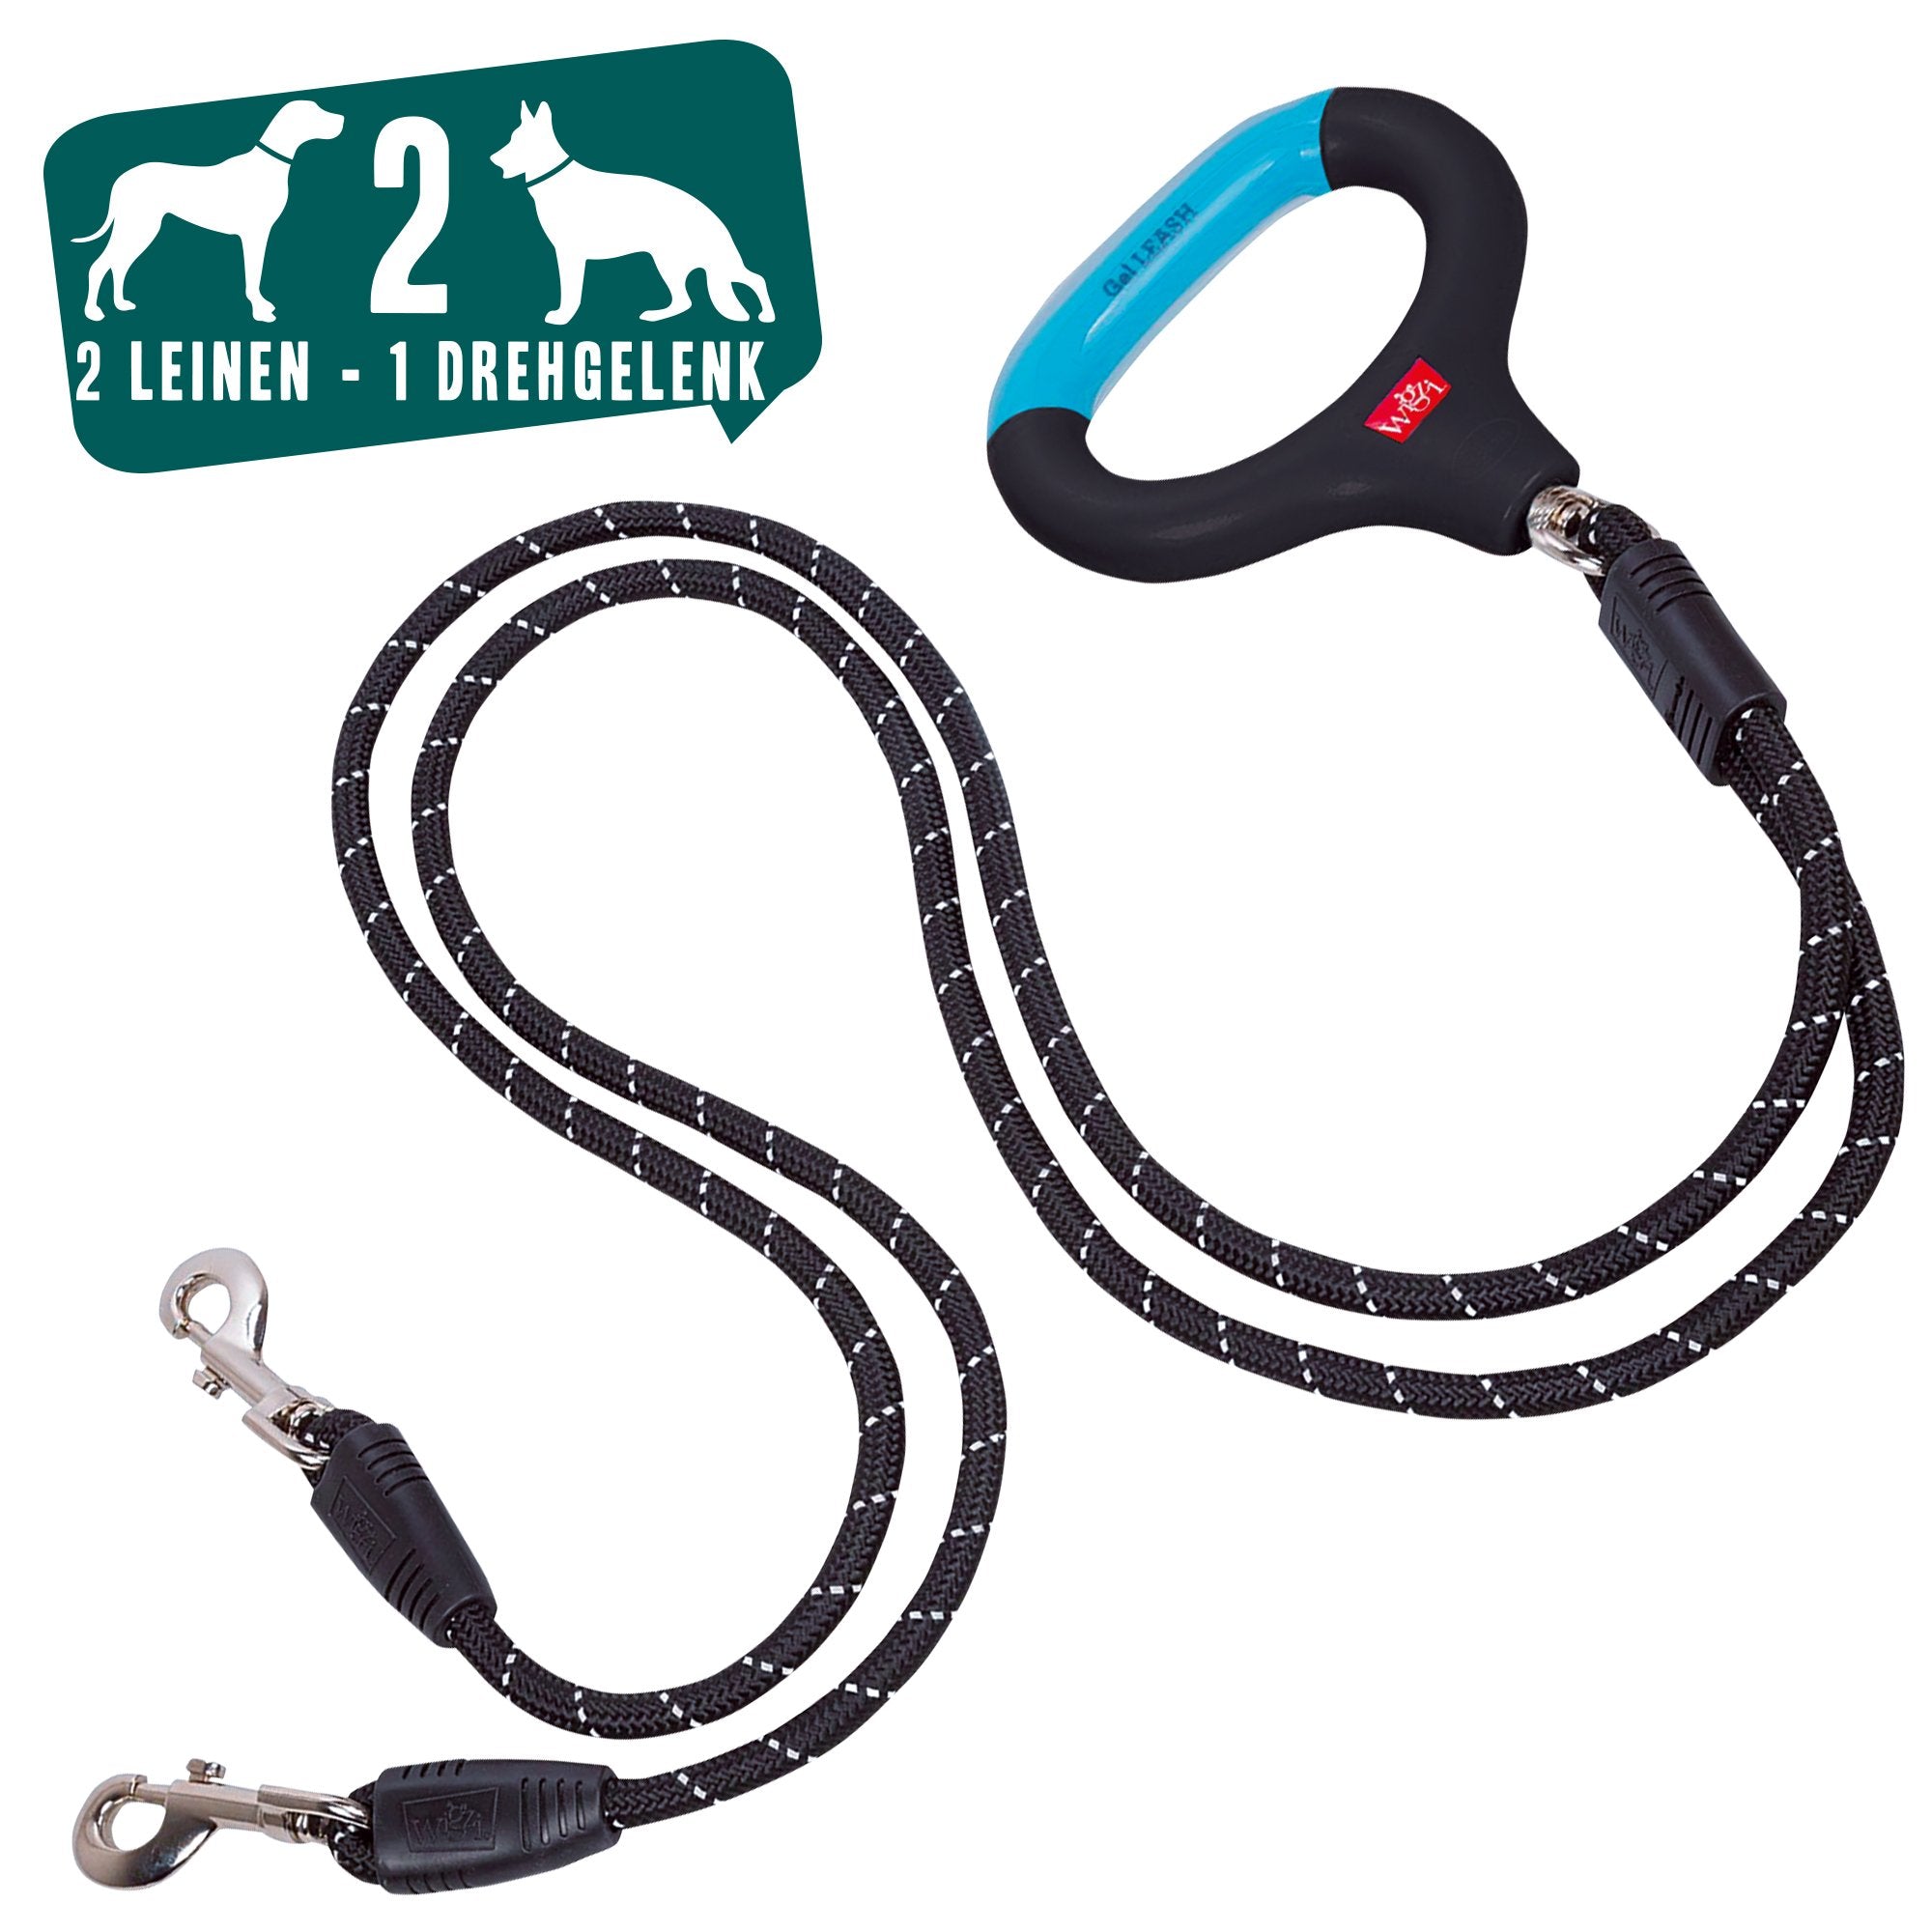 Wigzi Dual-Dog Walking Auto-Untangle Gel Grip Handle and Reflective Swivel Cable Dog Leash - Black and Blue - Small - 4.5 Feet  